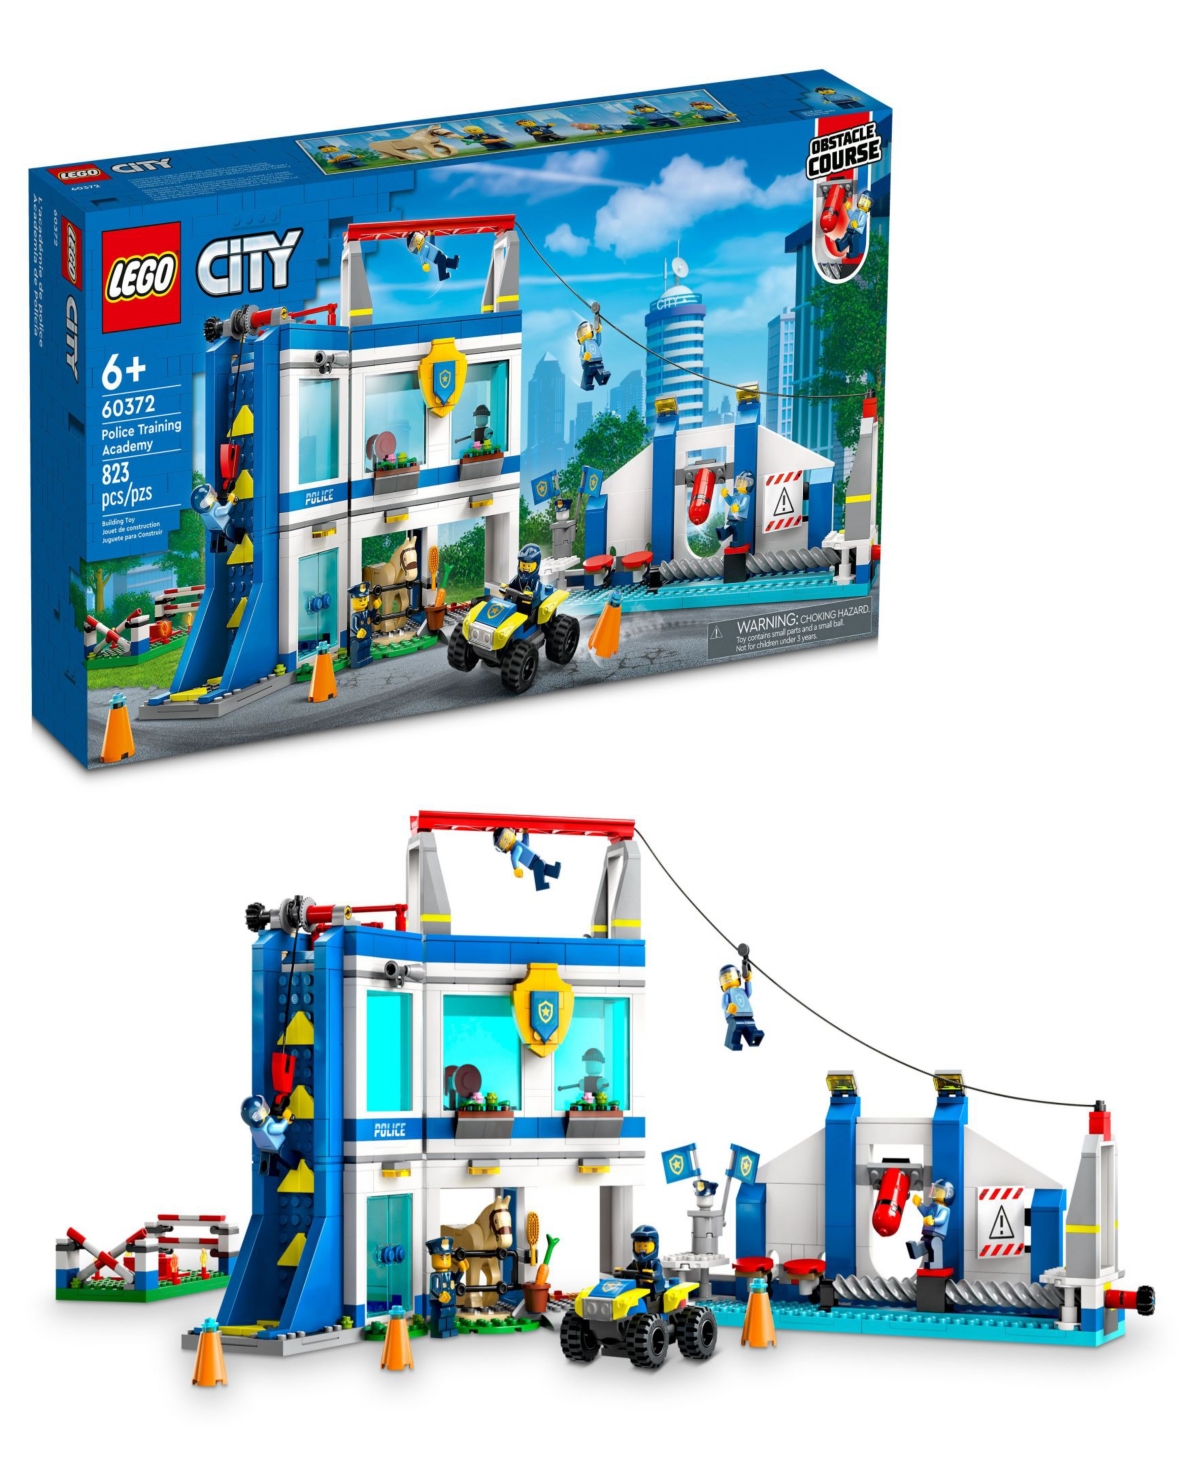 Lego City Police Training Academy 60372 Toy Building Set With 6 Minifigures In Multicolor